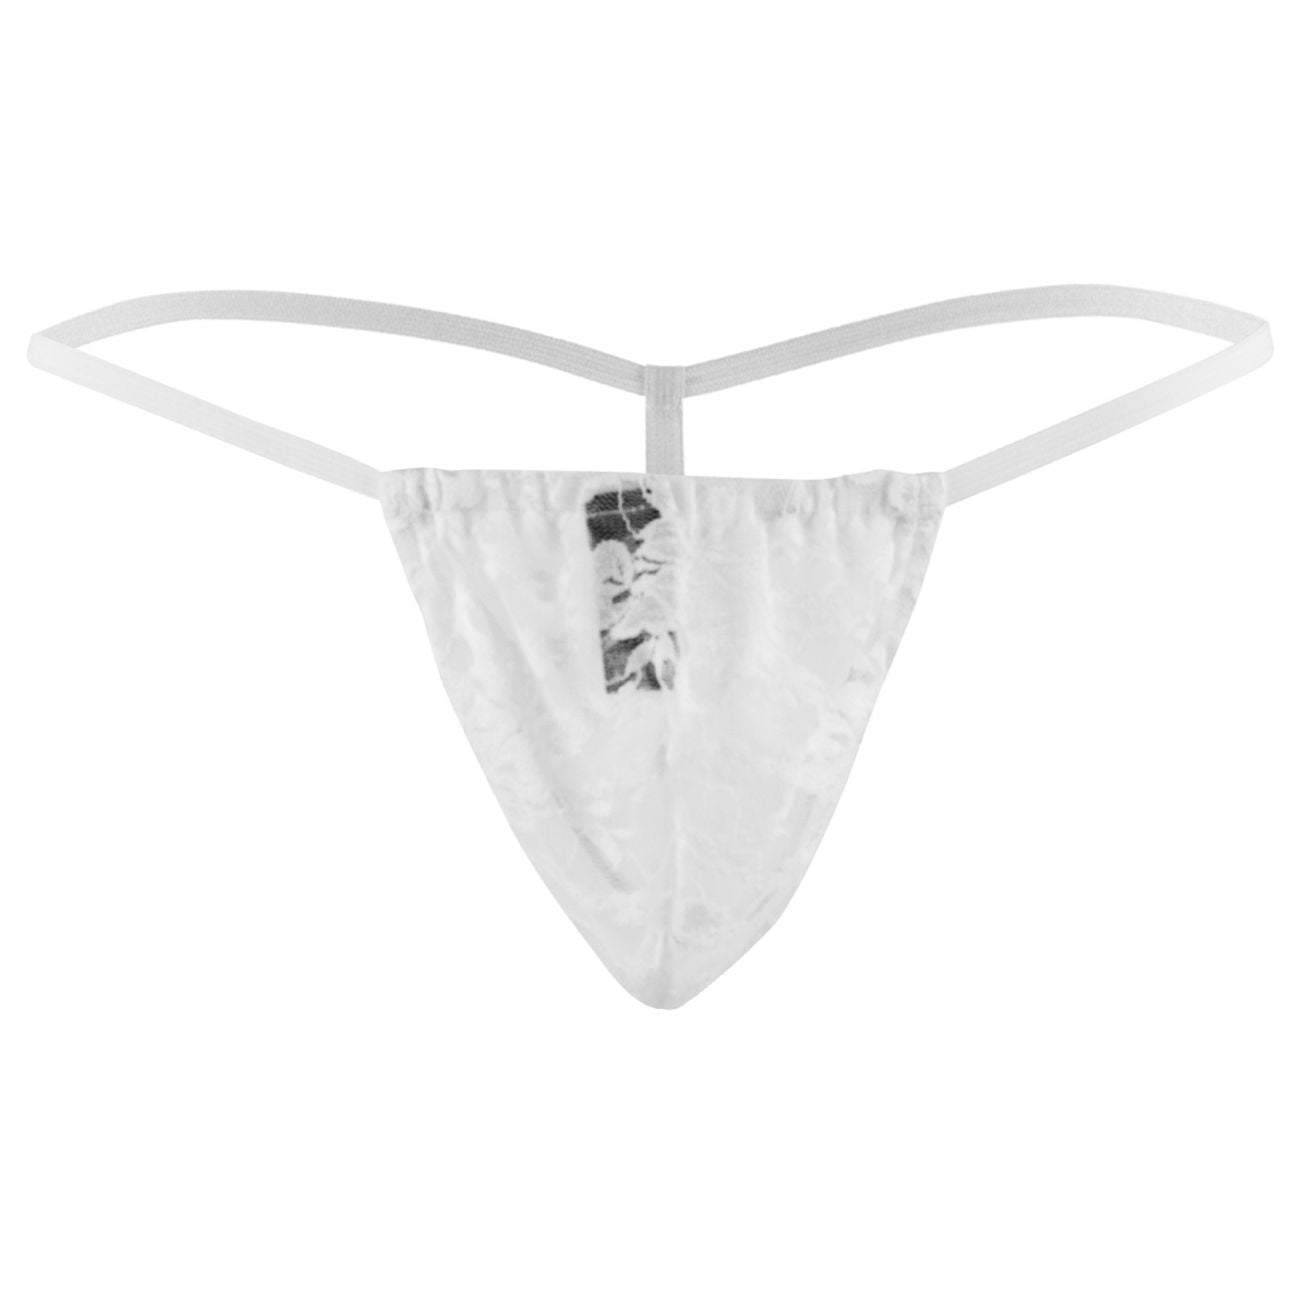 Male Power 450162 Stretch Lace Posing Strap Thong White